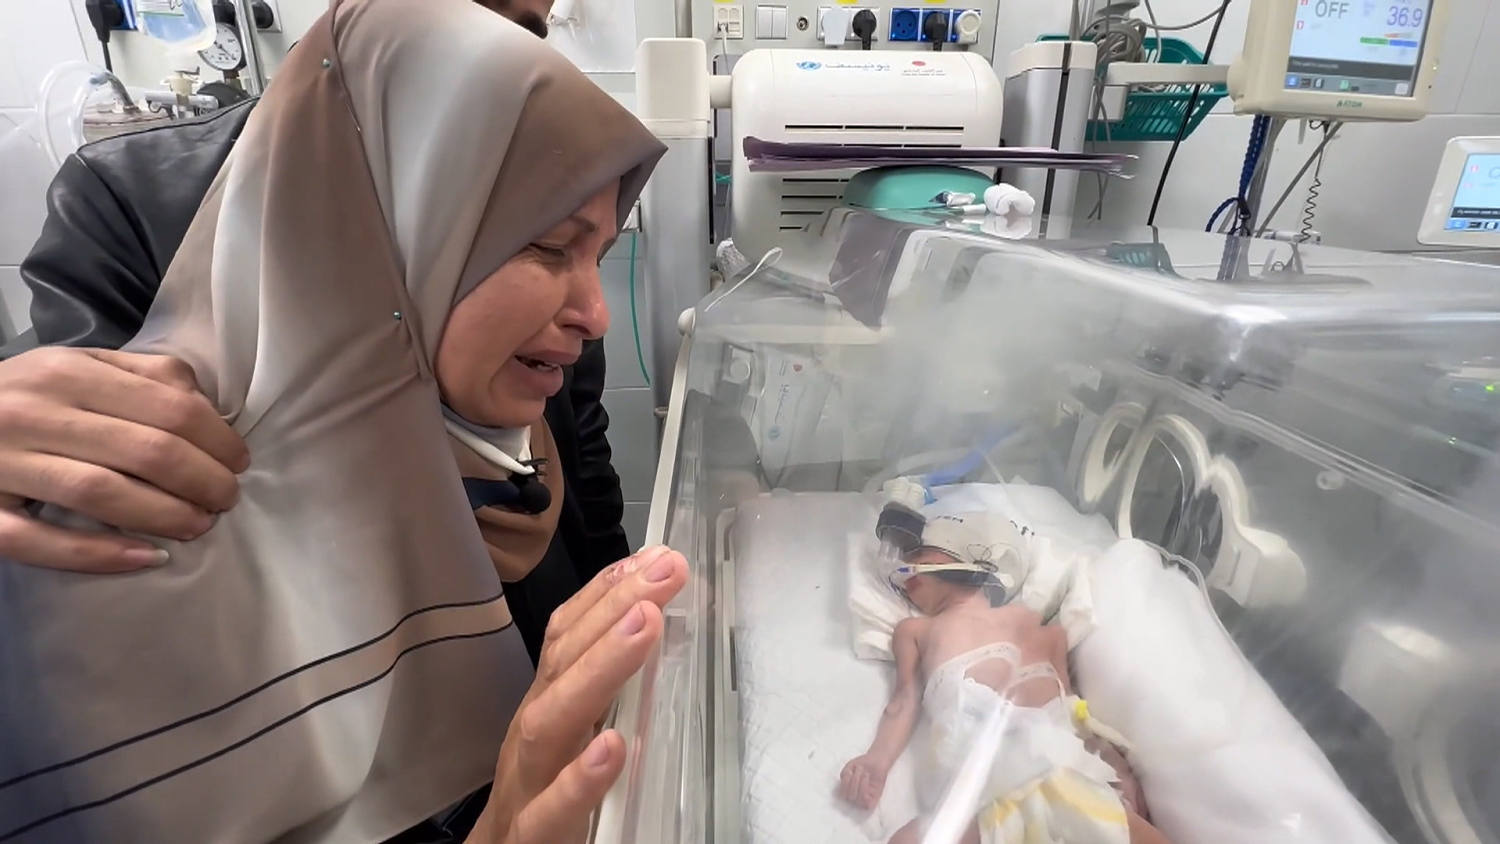 Relatives meet baby saved from pregnant mother killed in Rafah airstrike